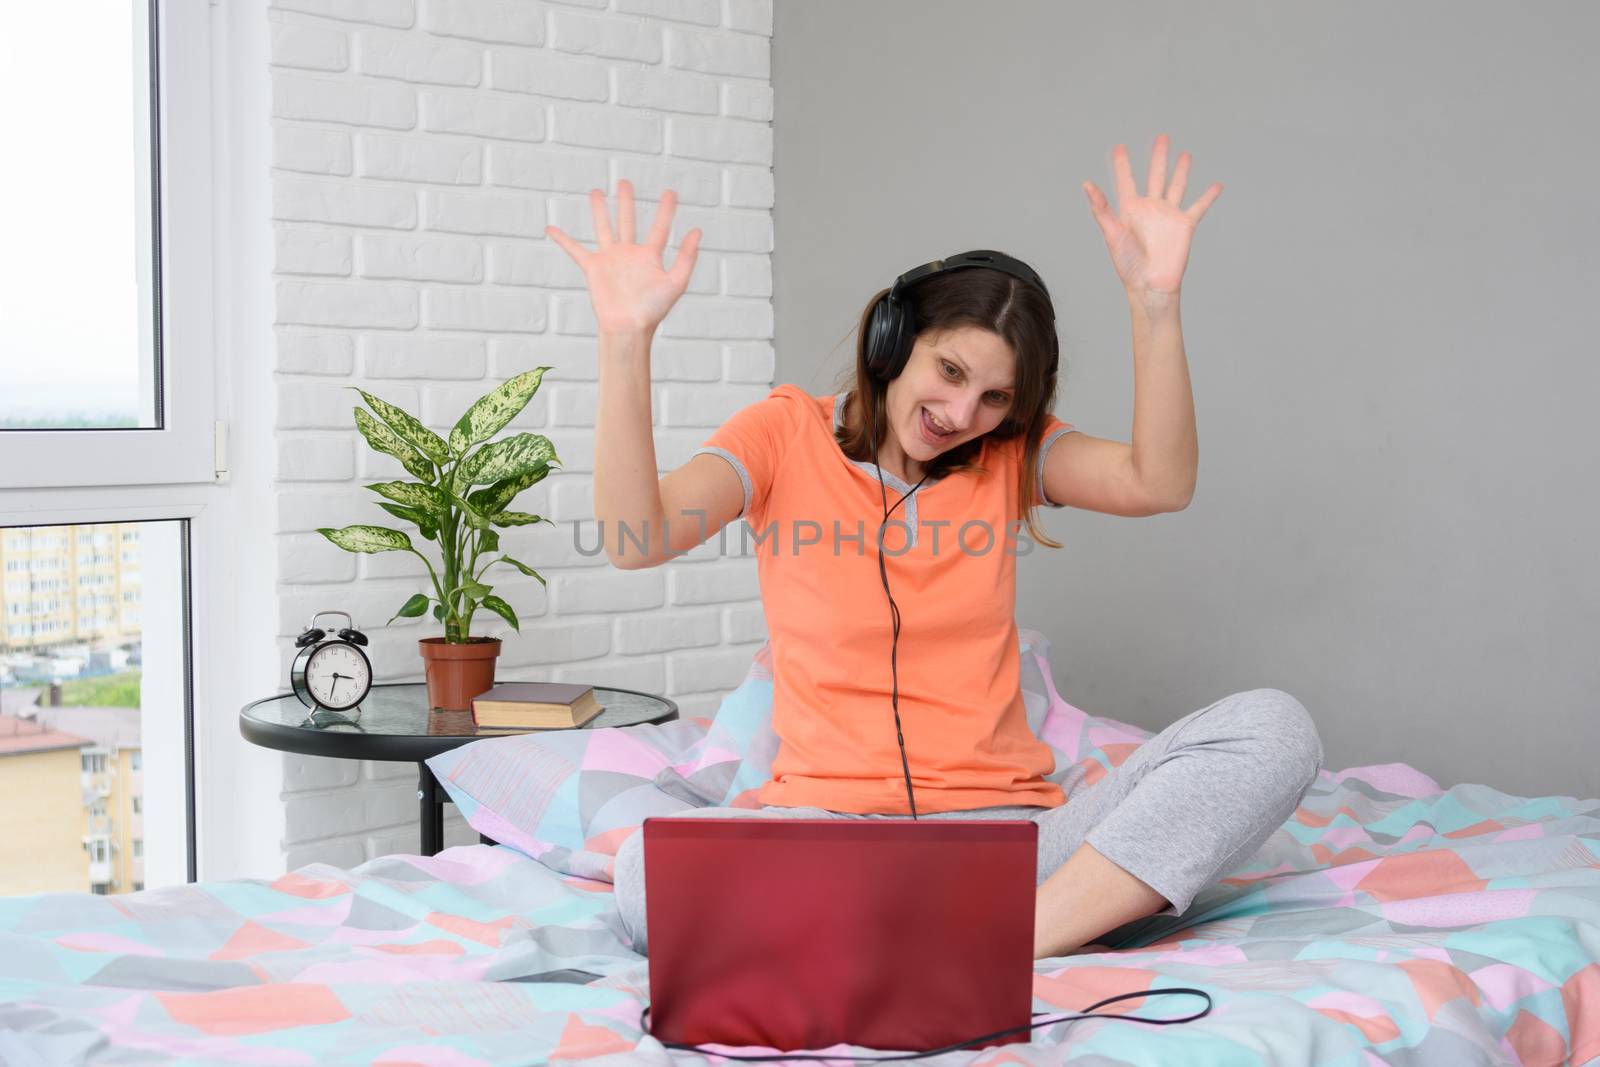 The girl is funny and welcoming waving her hands while looking at the laptop screen